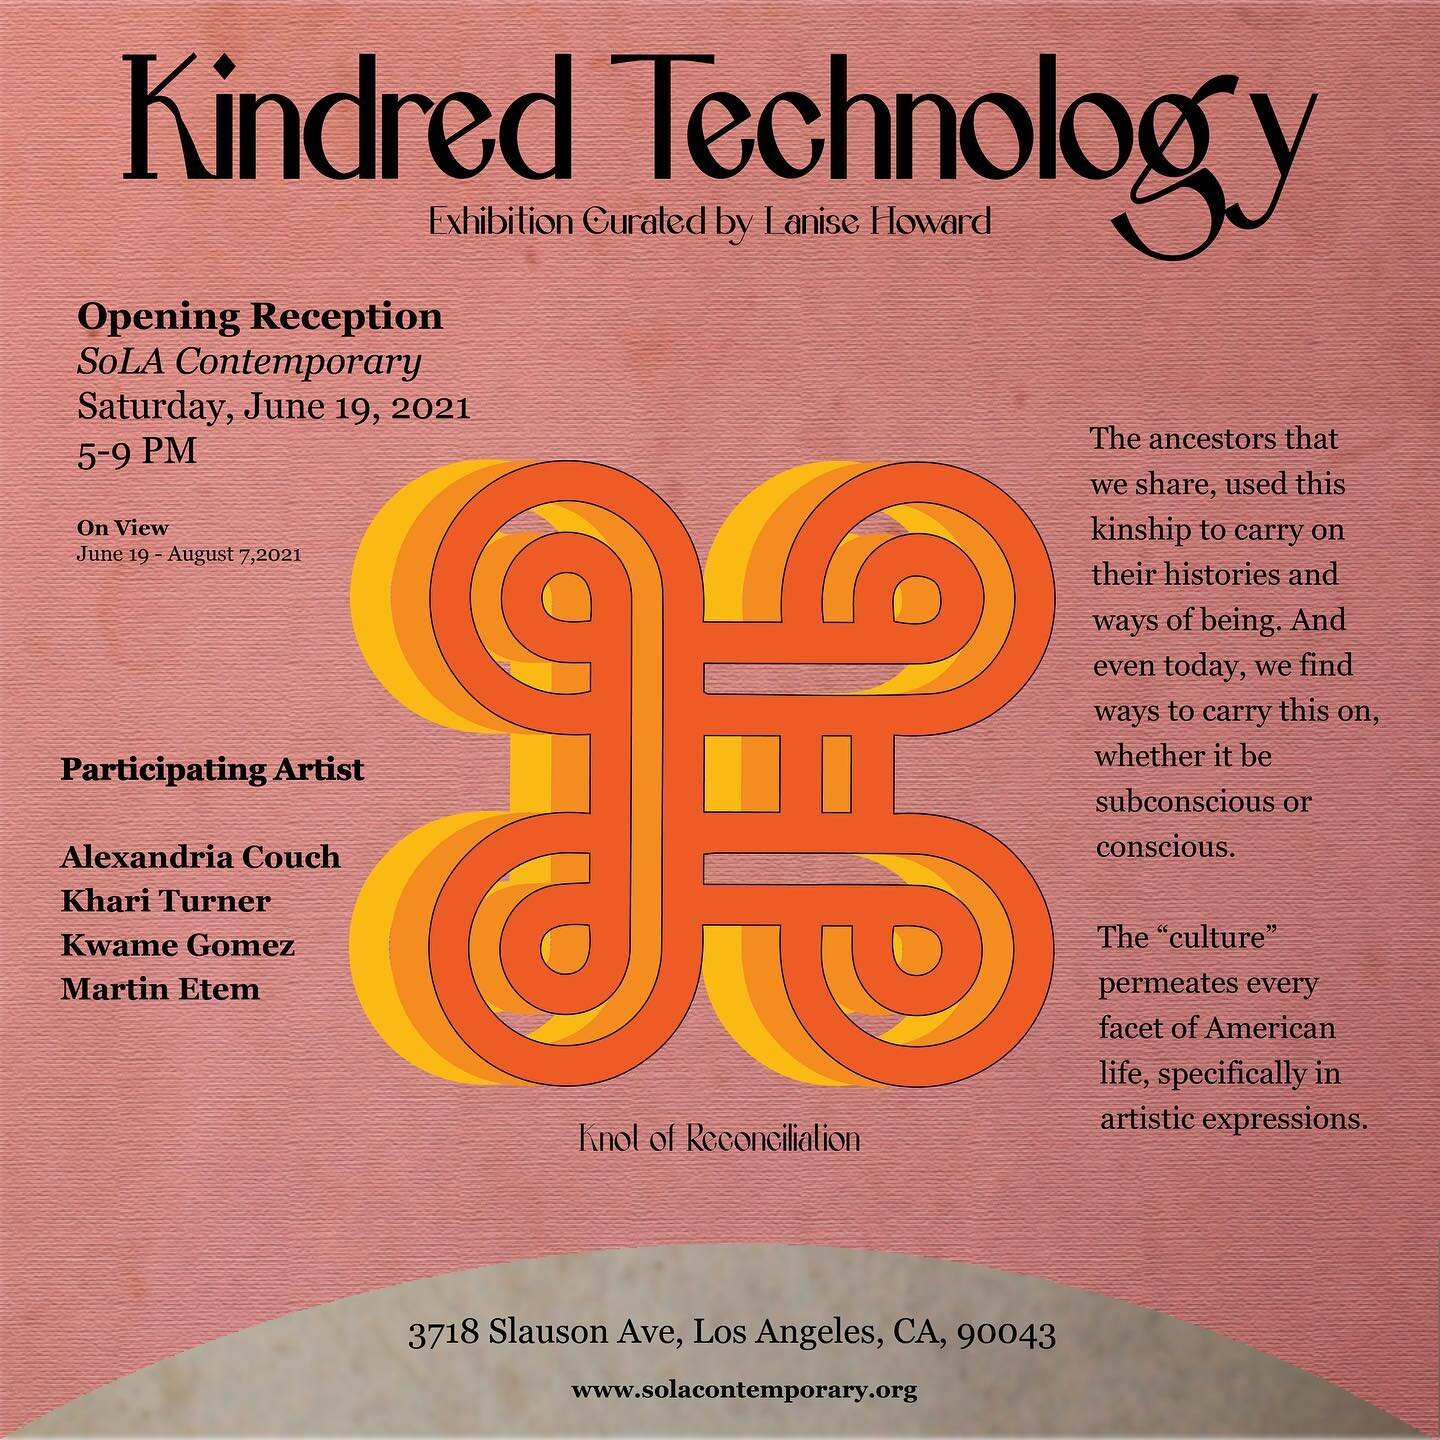 😲Surprise! It's here!! Kindred Technology exhibition will be on view: June 19 &ndash; August 7, 2021. The opening reception coincides with Juneteenth, an important day of celebration that commemorates the emancipation of Black Americans in the Unite